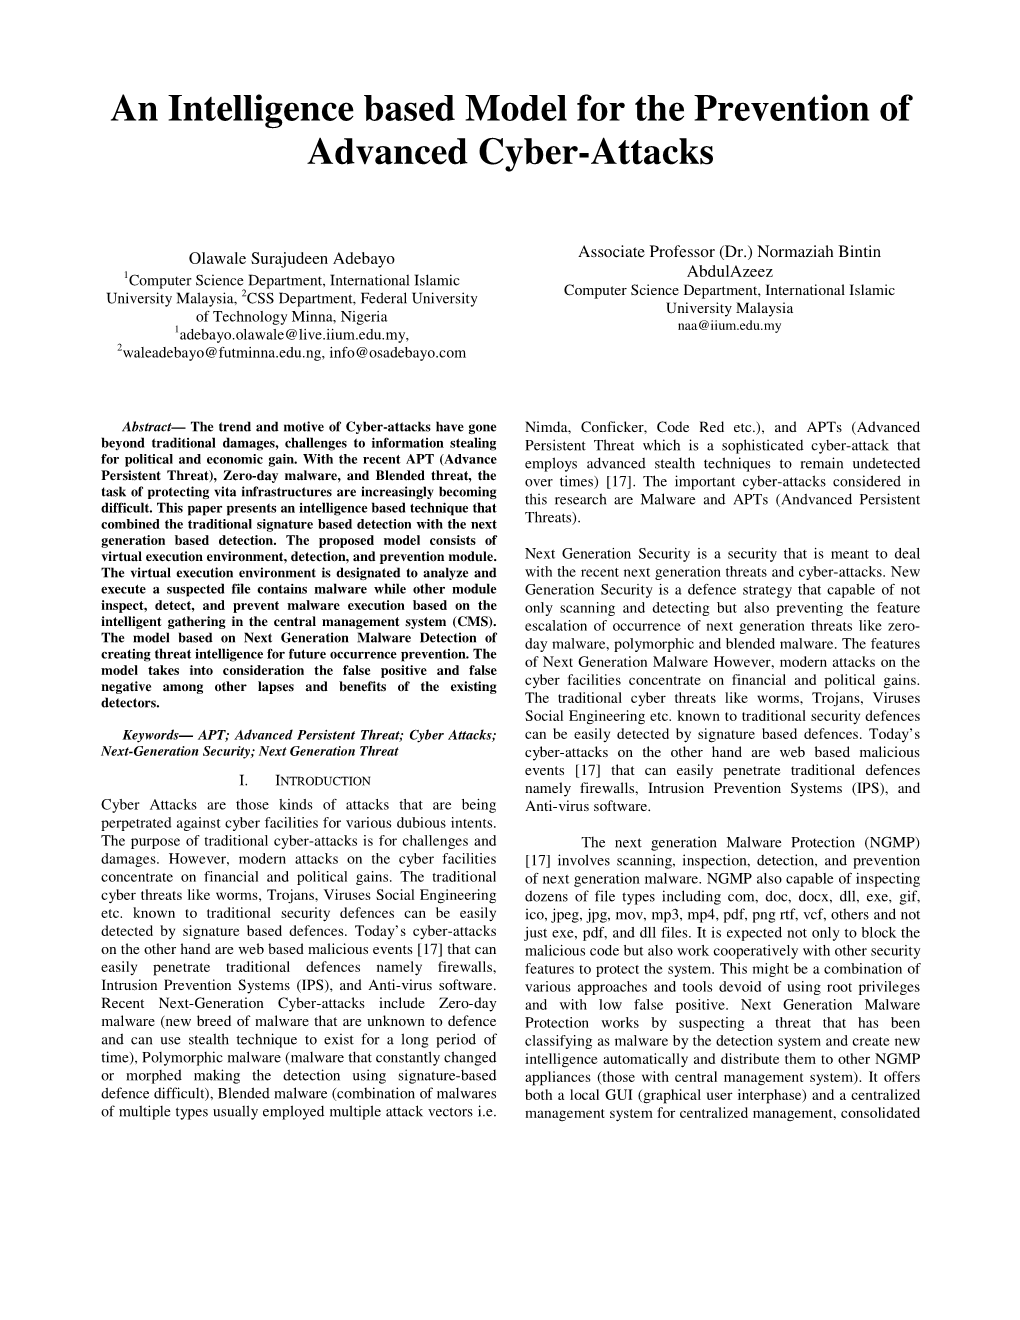 An Intelligence Based Model for the Prevention of Advanced Cyber-Attacks